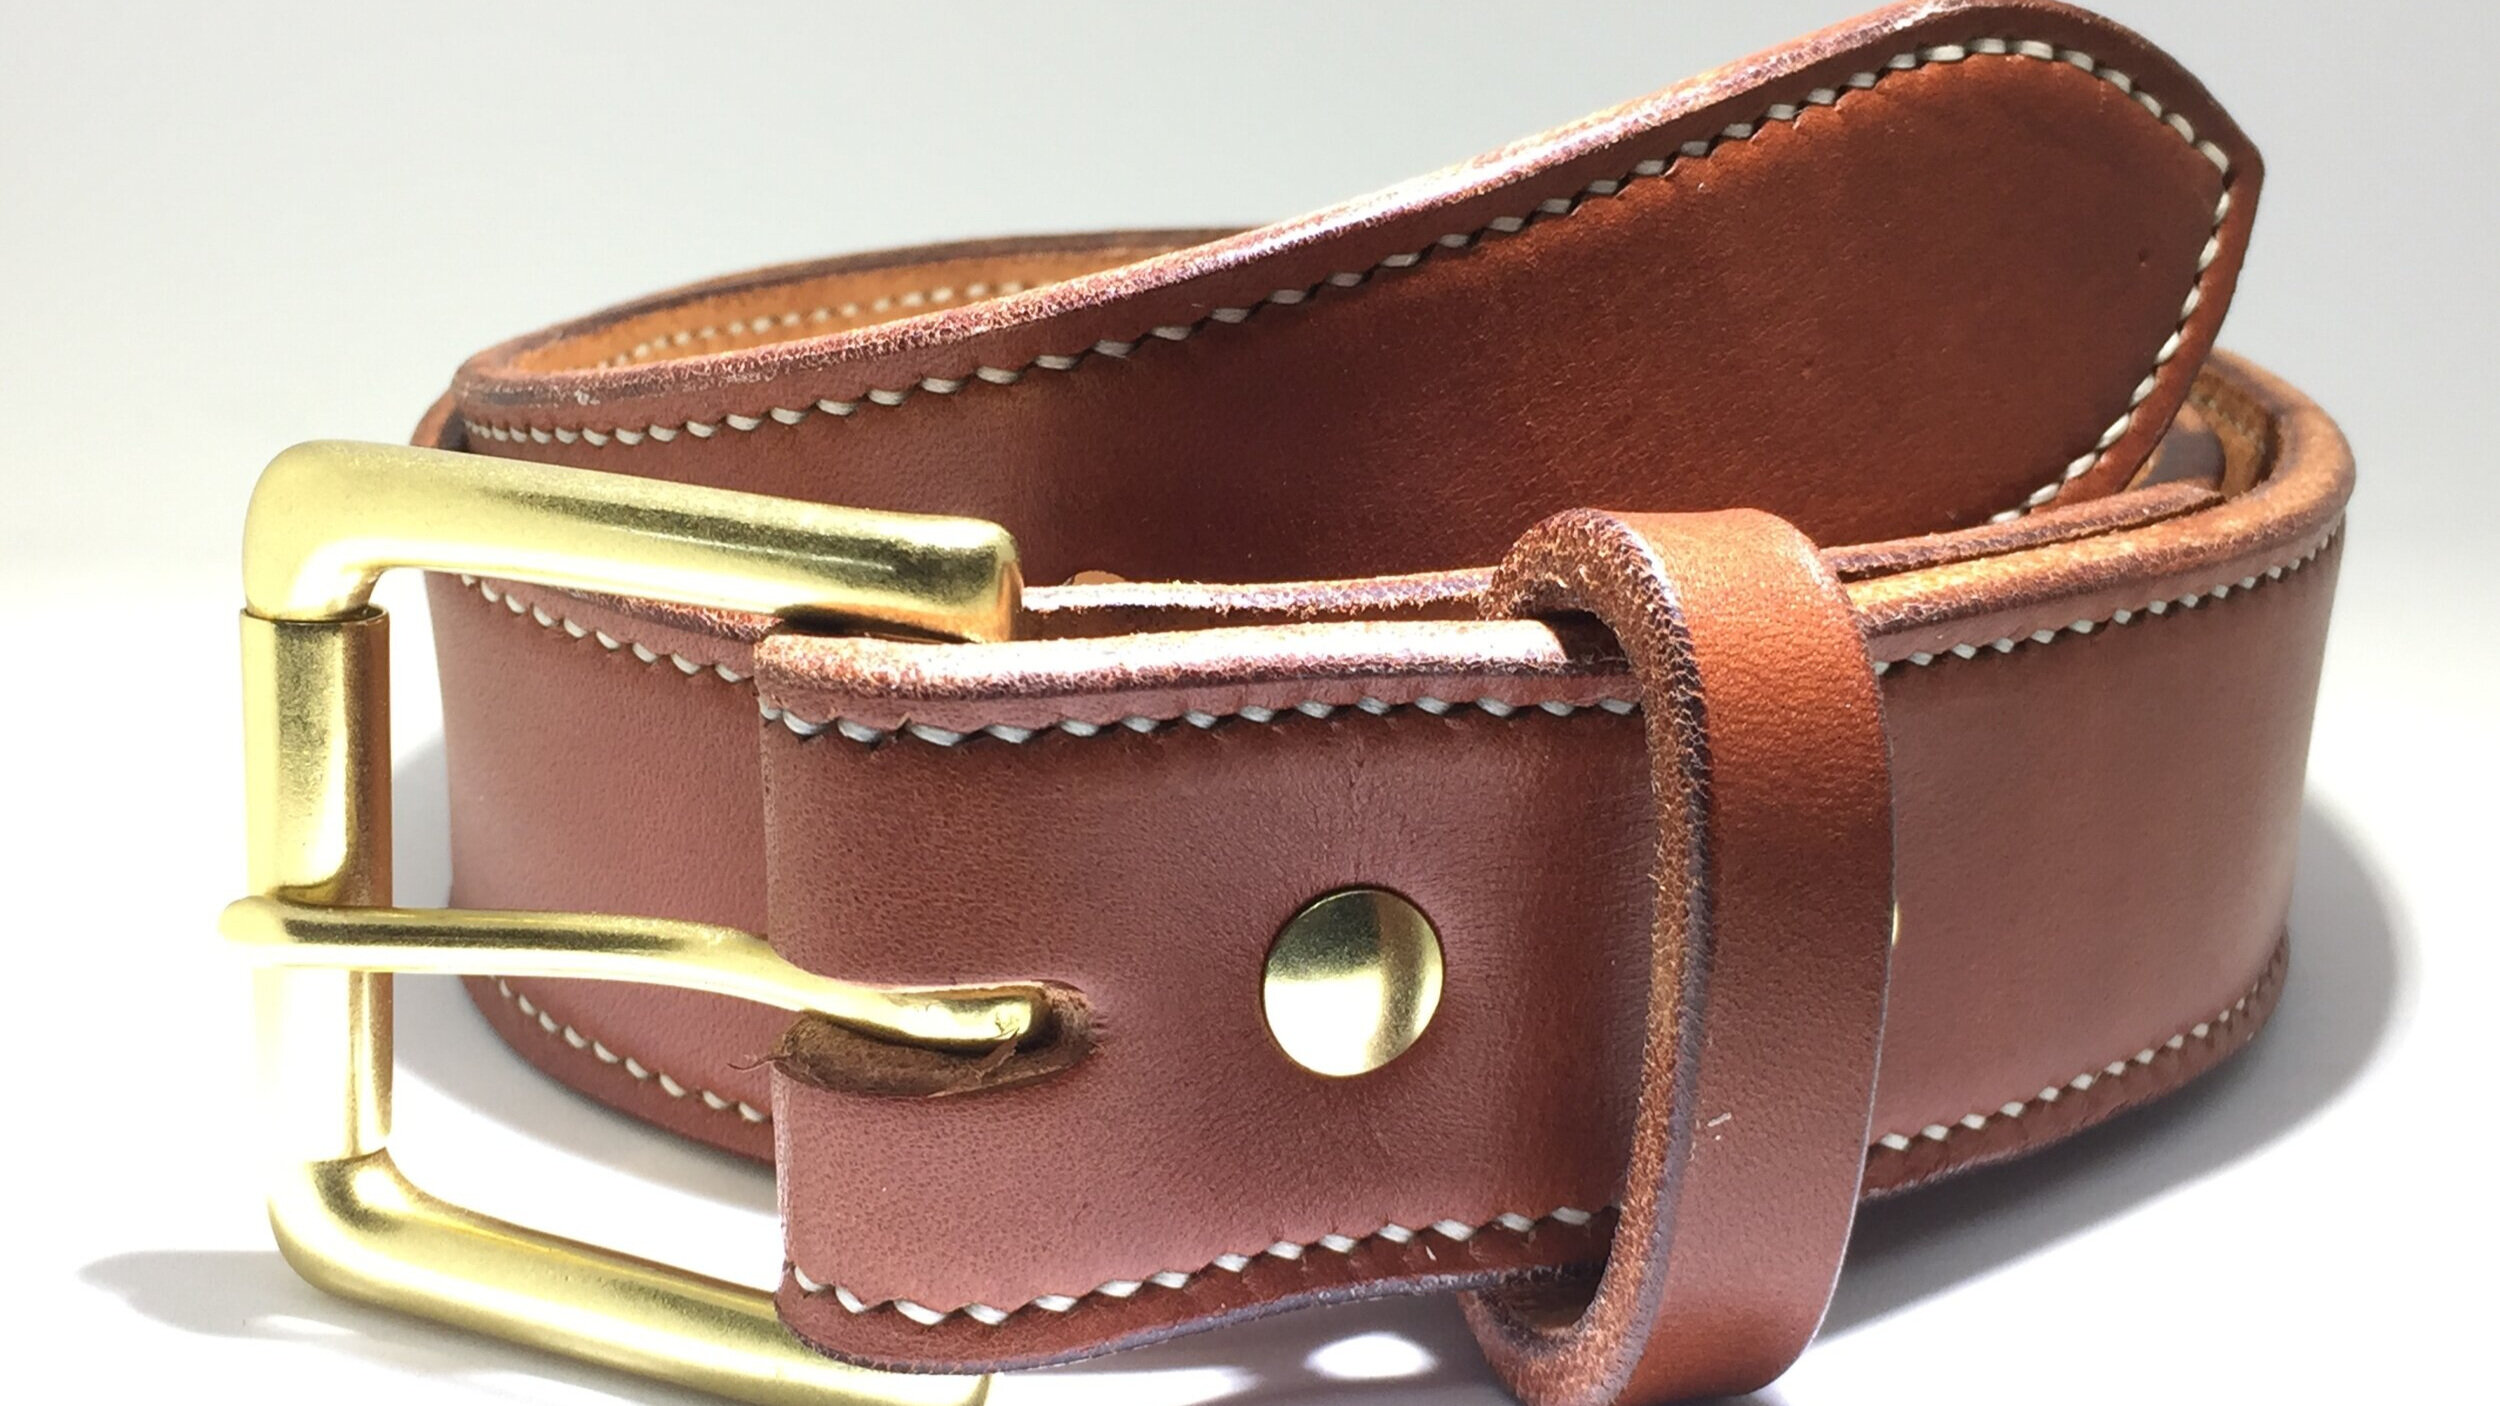 Premium Quality Leather Accessories | Made in the USA